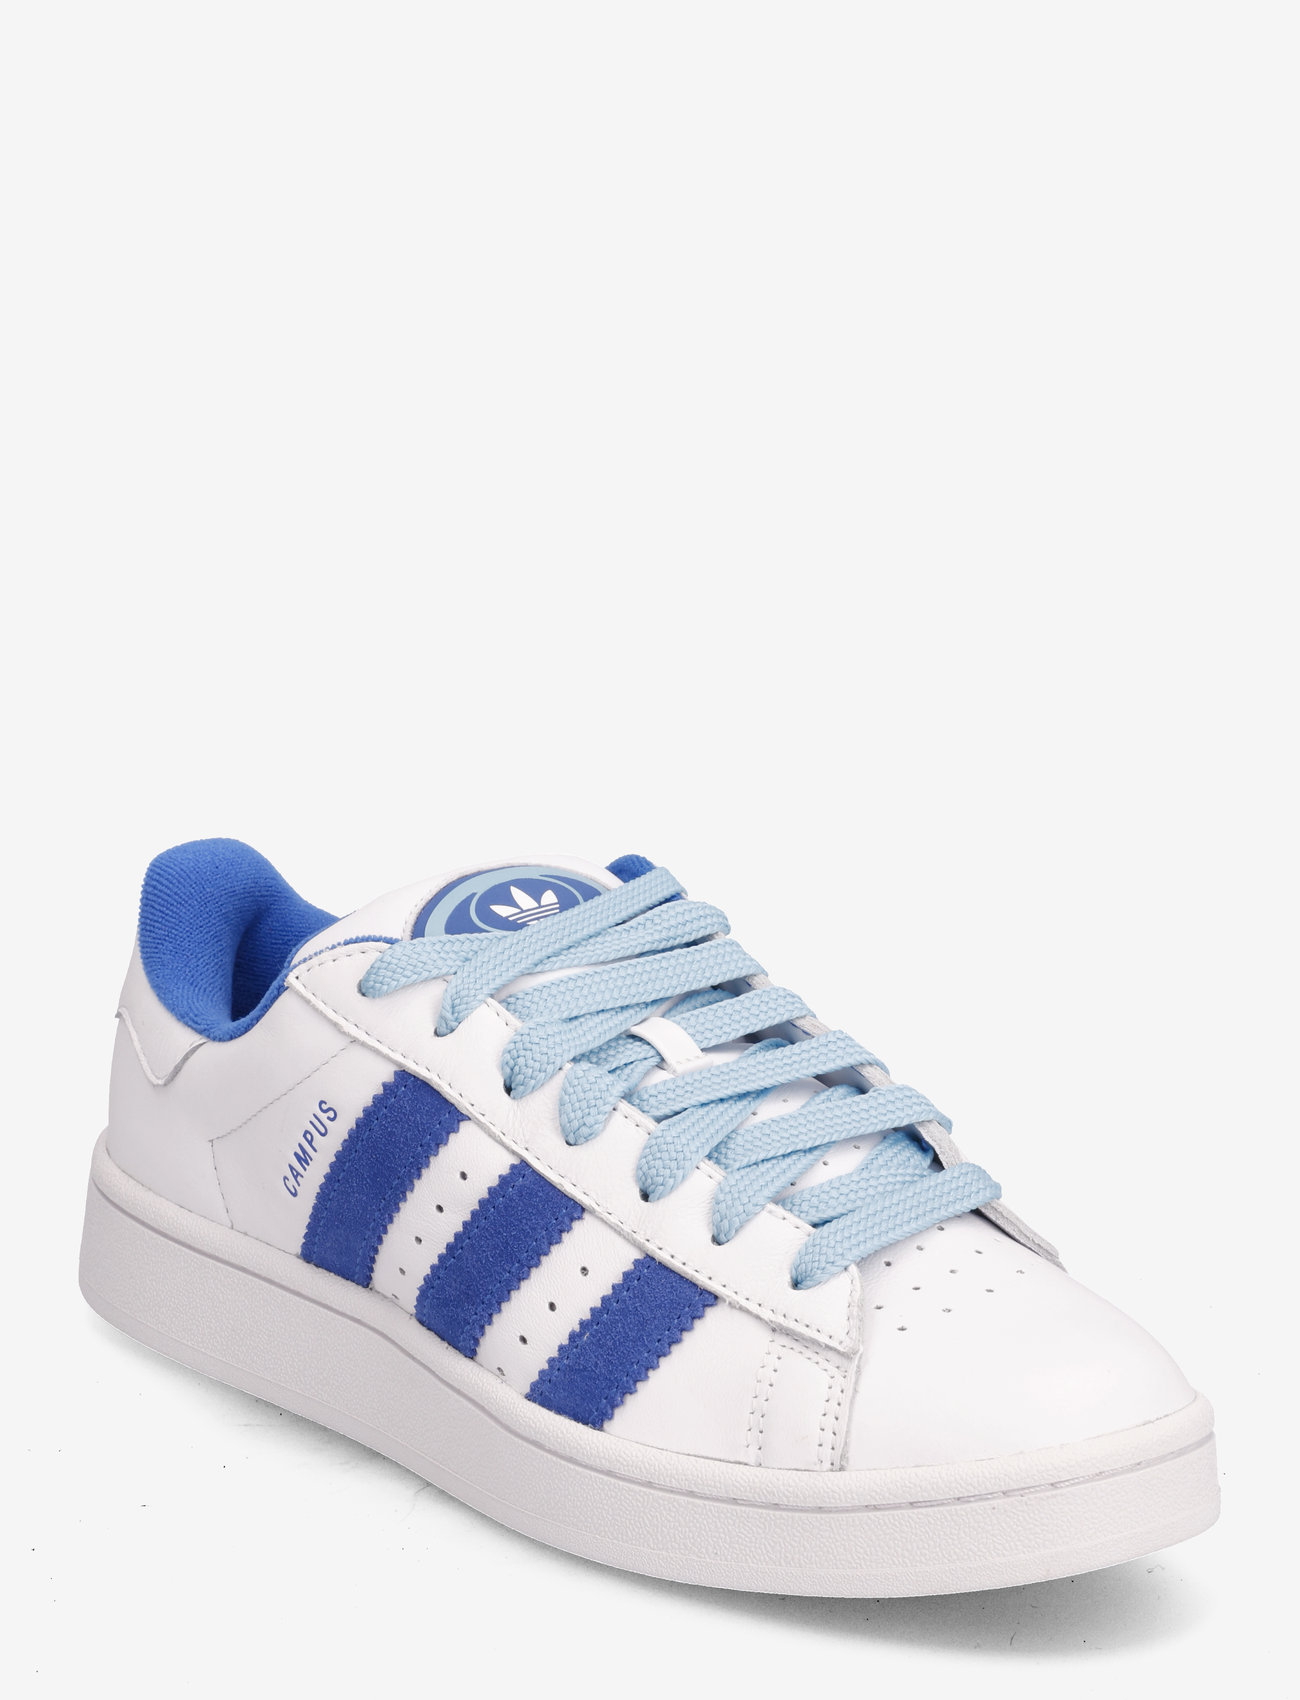 adidas Originals - CAMPUS 00s - low top sneakers - ftwwht/blue/brblue - 0